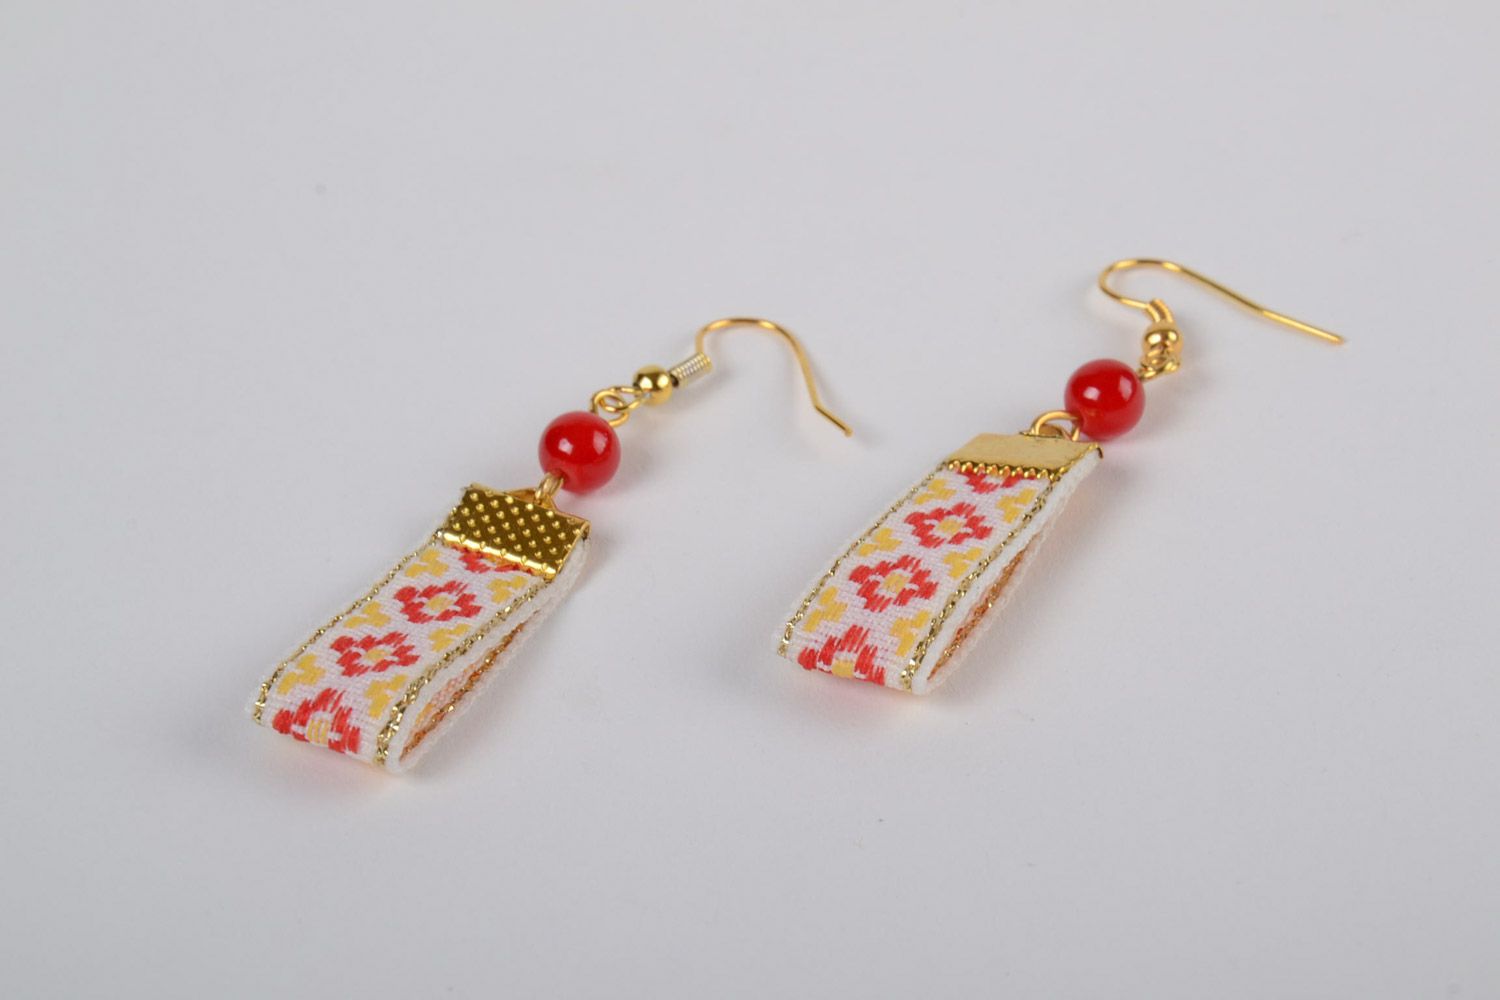 Handmade earrings with charms in ethnic style with bright beads for women photo 4